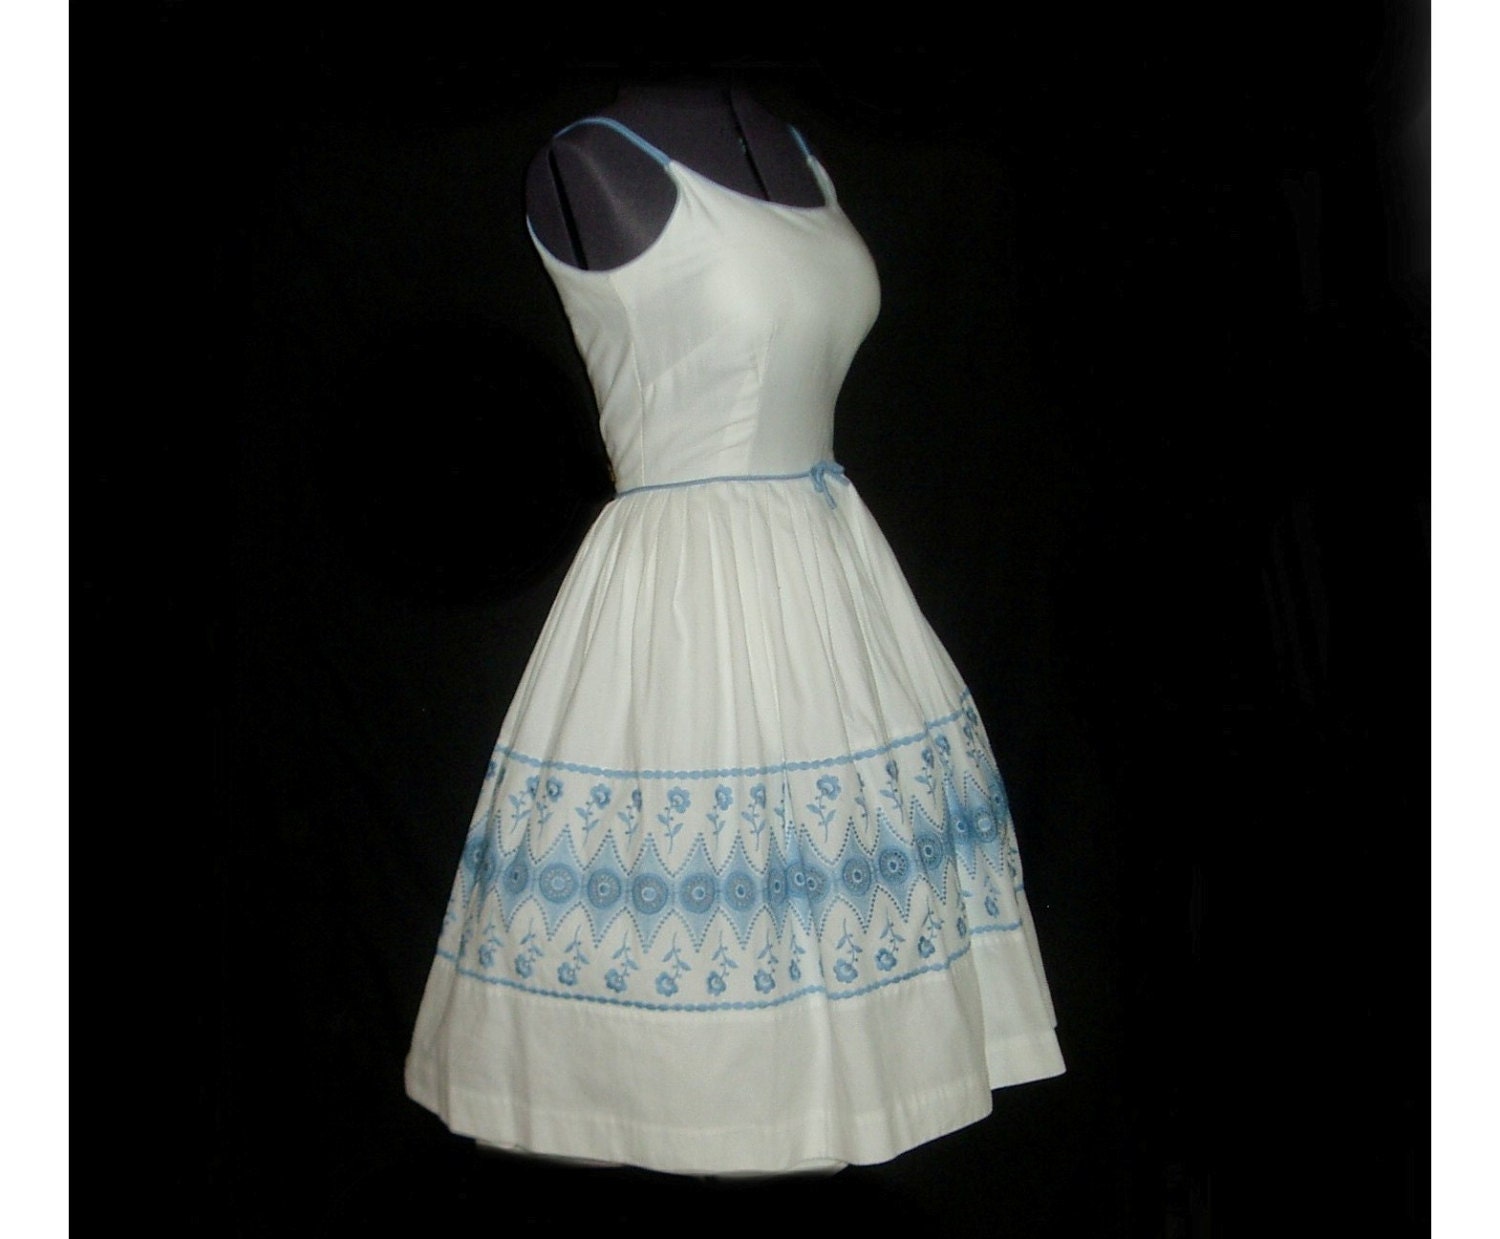 Vintage 50s White Cotton Pique Party Cupcake Full Skirt Dress by Toni Todd M-L